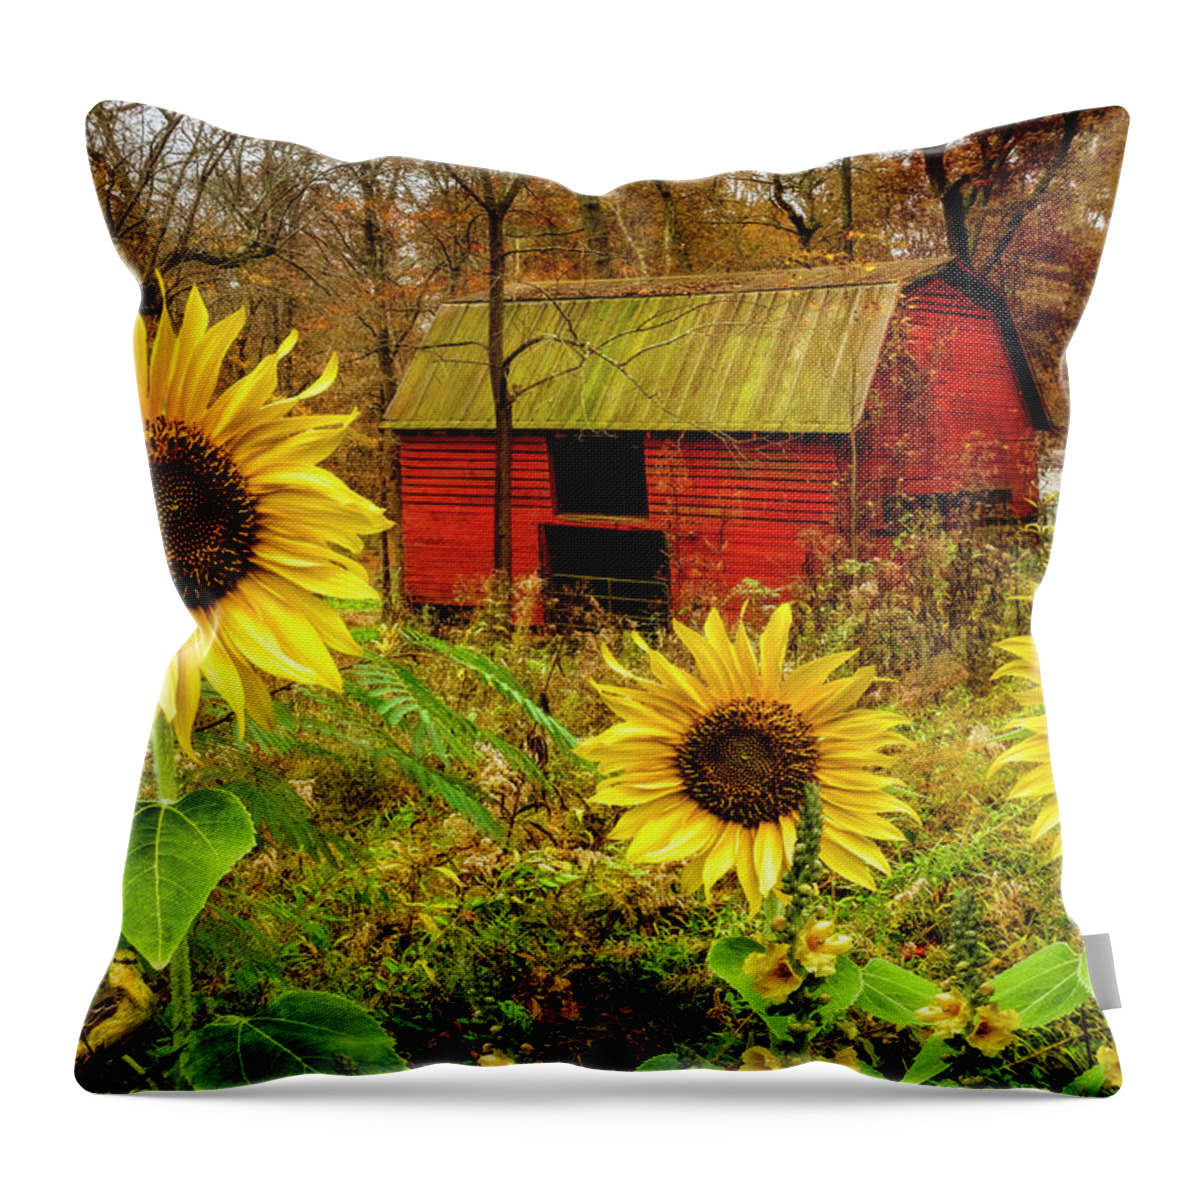 Sunflower Throw Pillow featuring the photograph Red Barn in Sunflowers II by Debra and Dave Vanderlaan